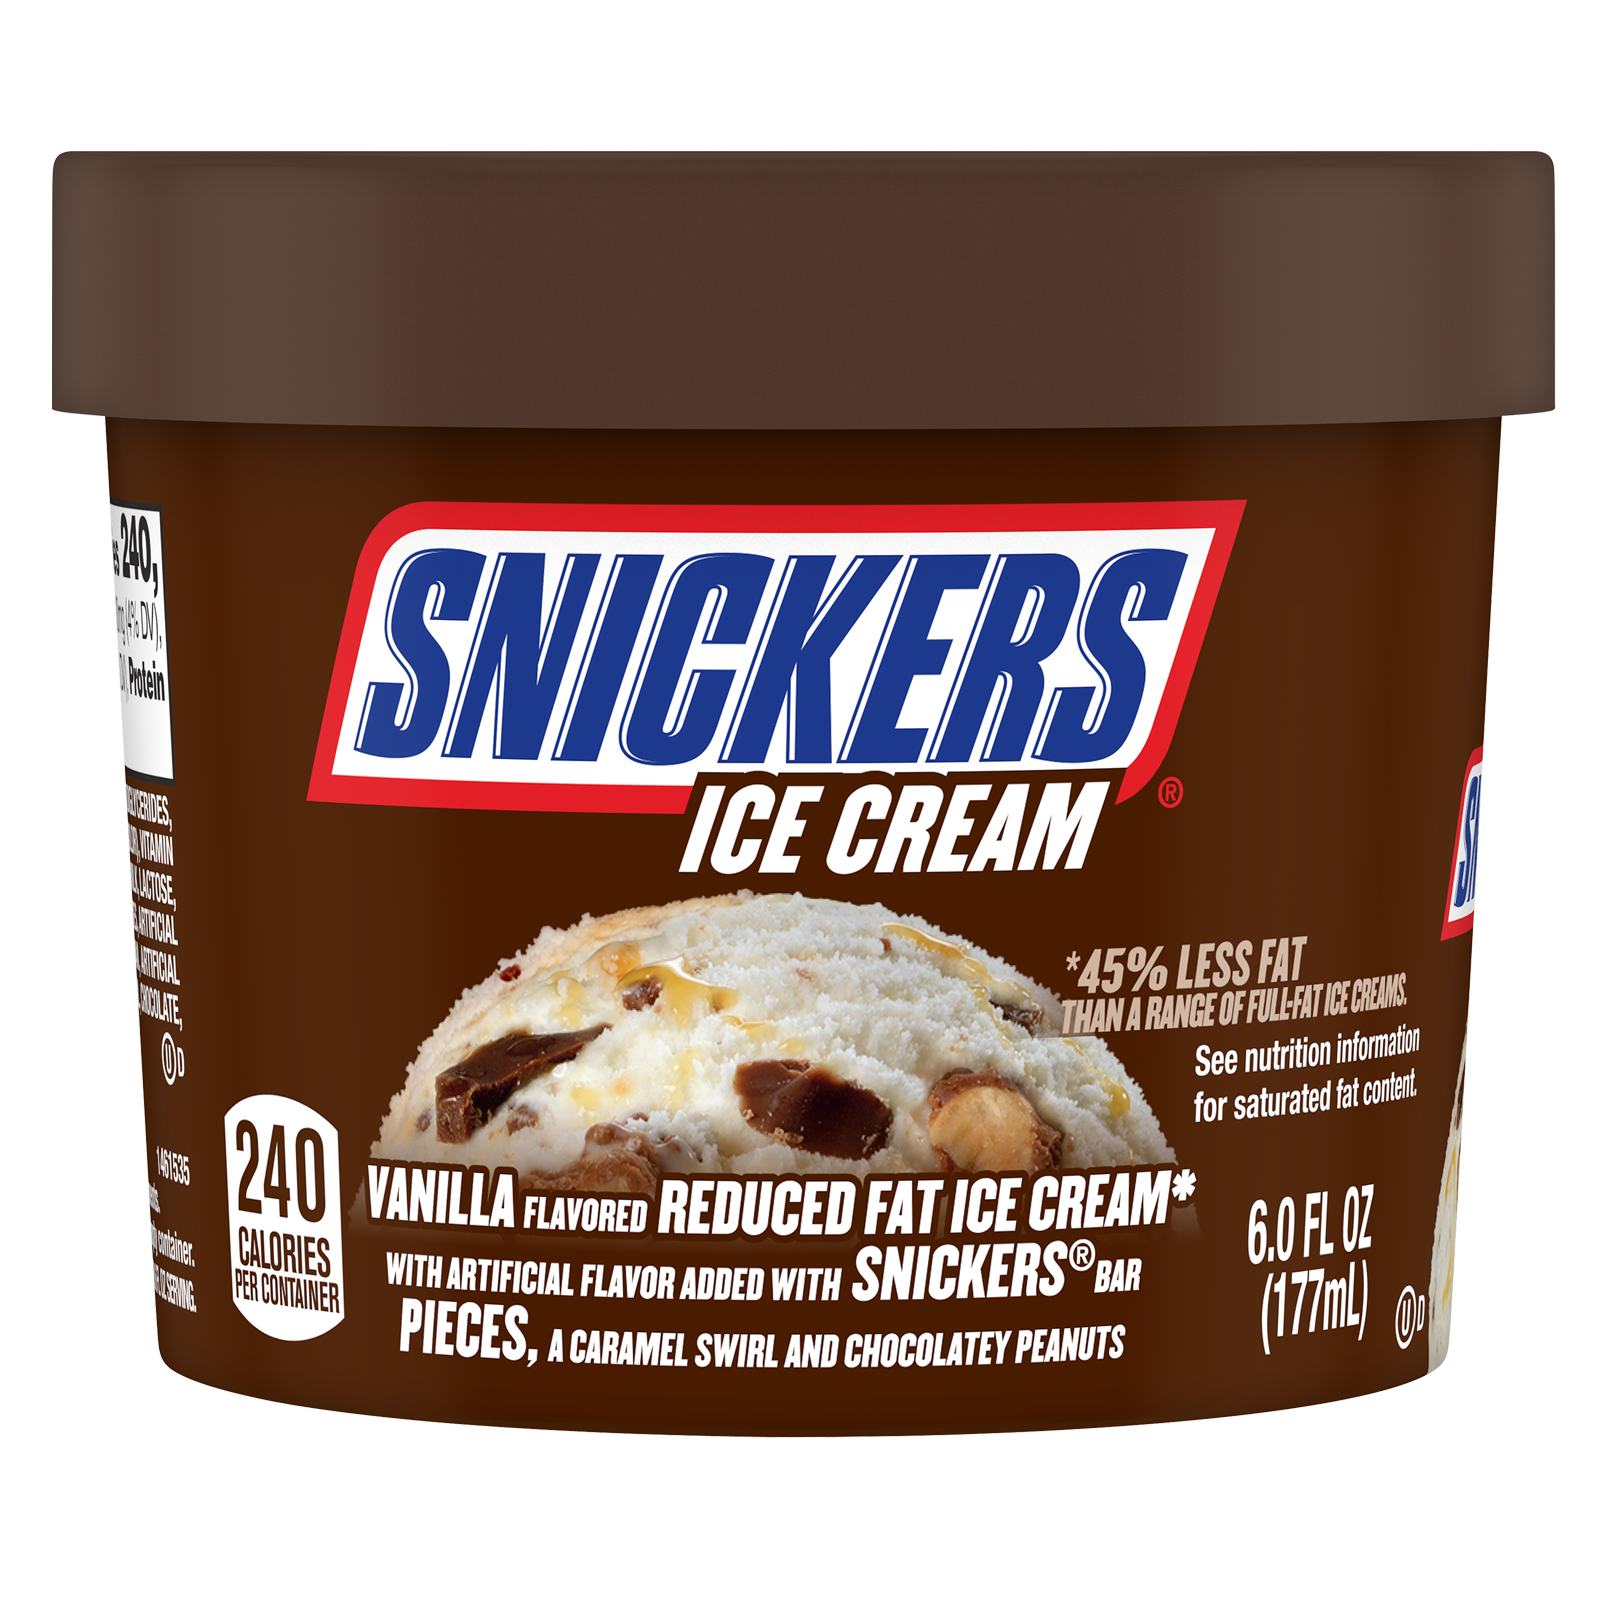 Snickers Vanilla Flavored Reduced Fat Ice Cream Cup 6oz